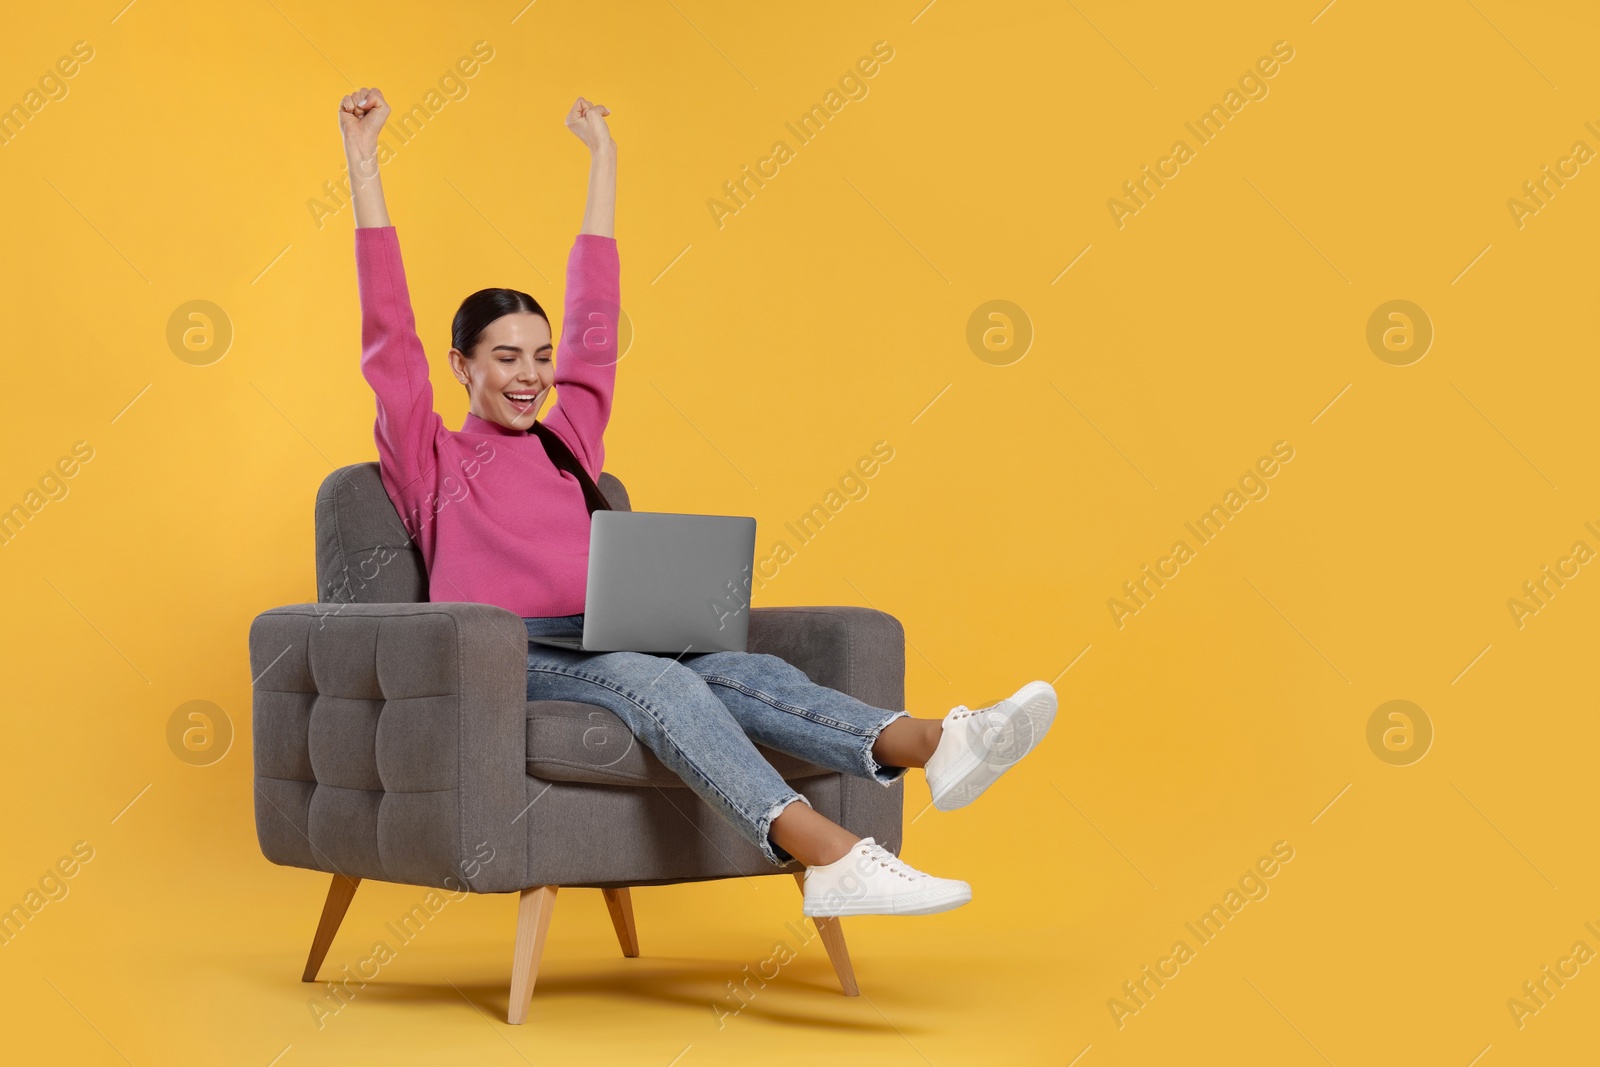 Photo of Cheerful woman with laptop sitting in armchair on orange background